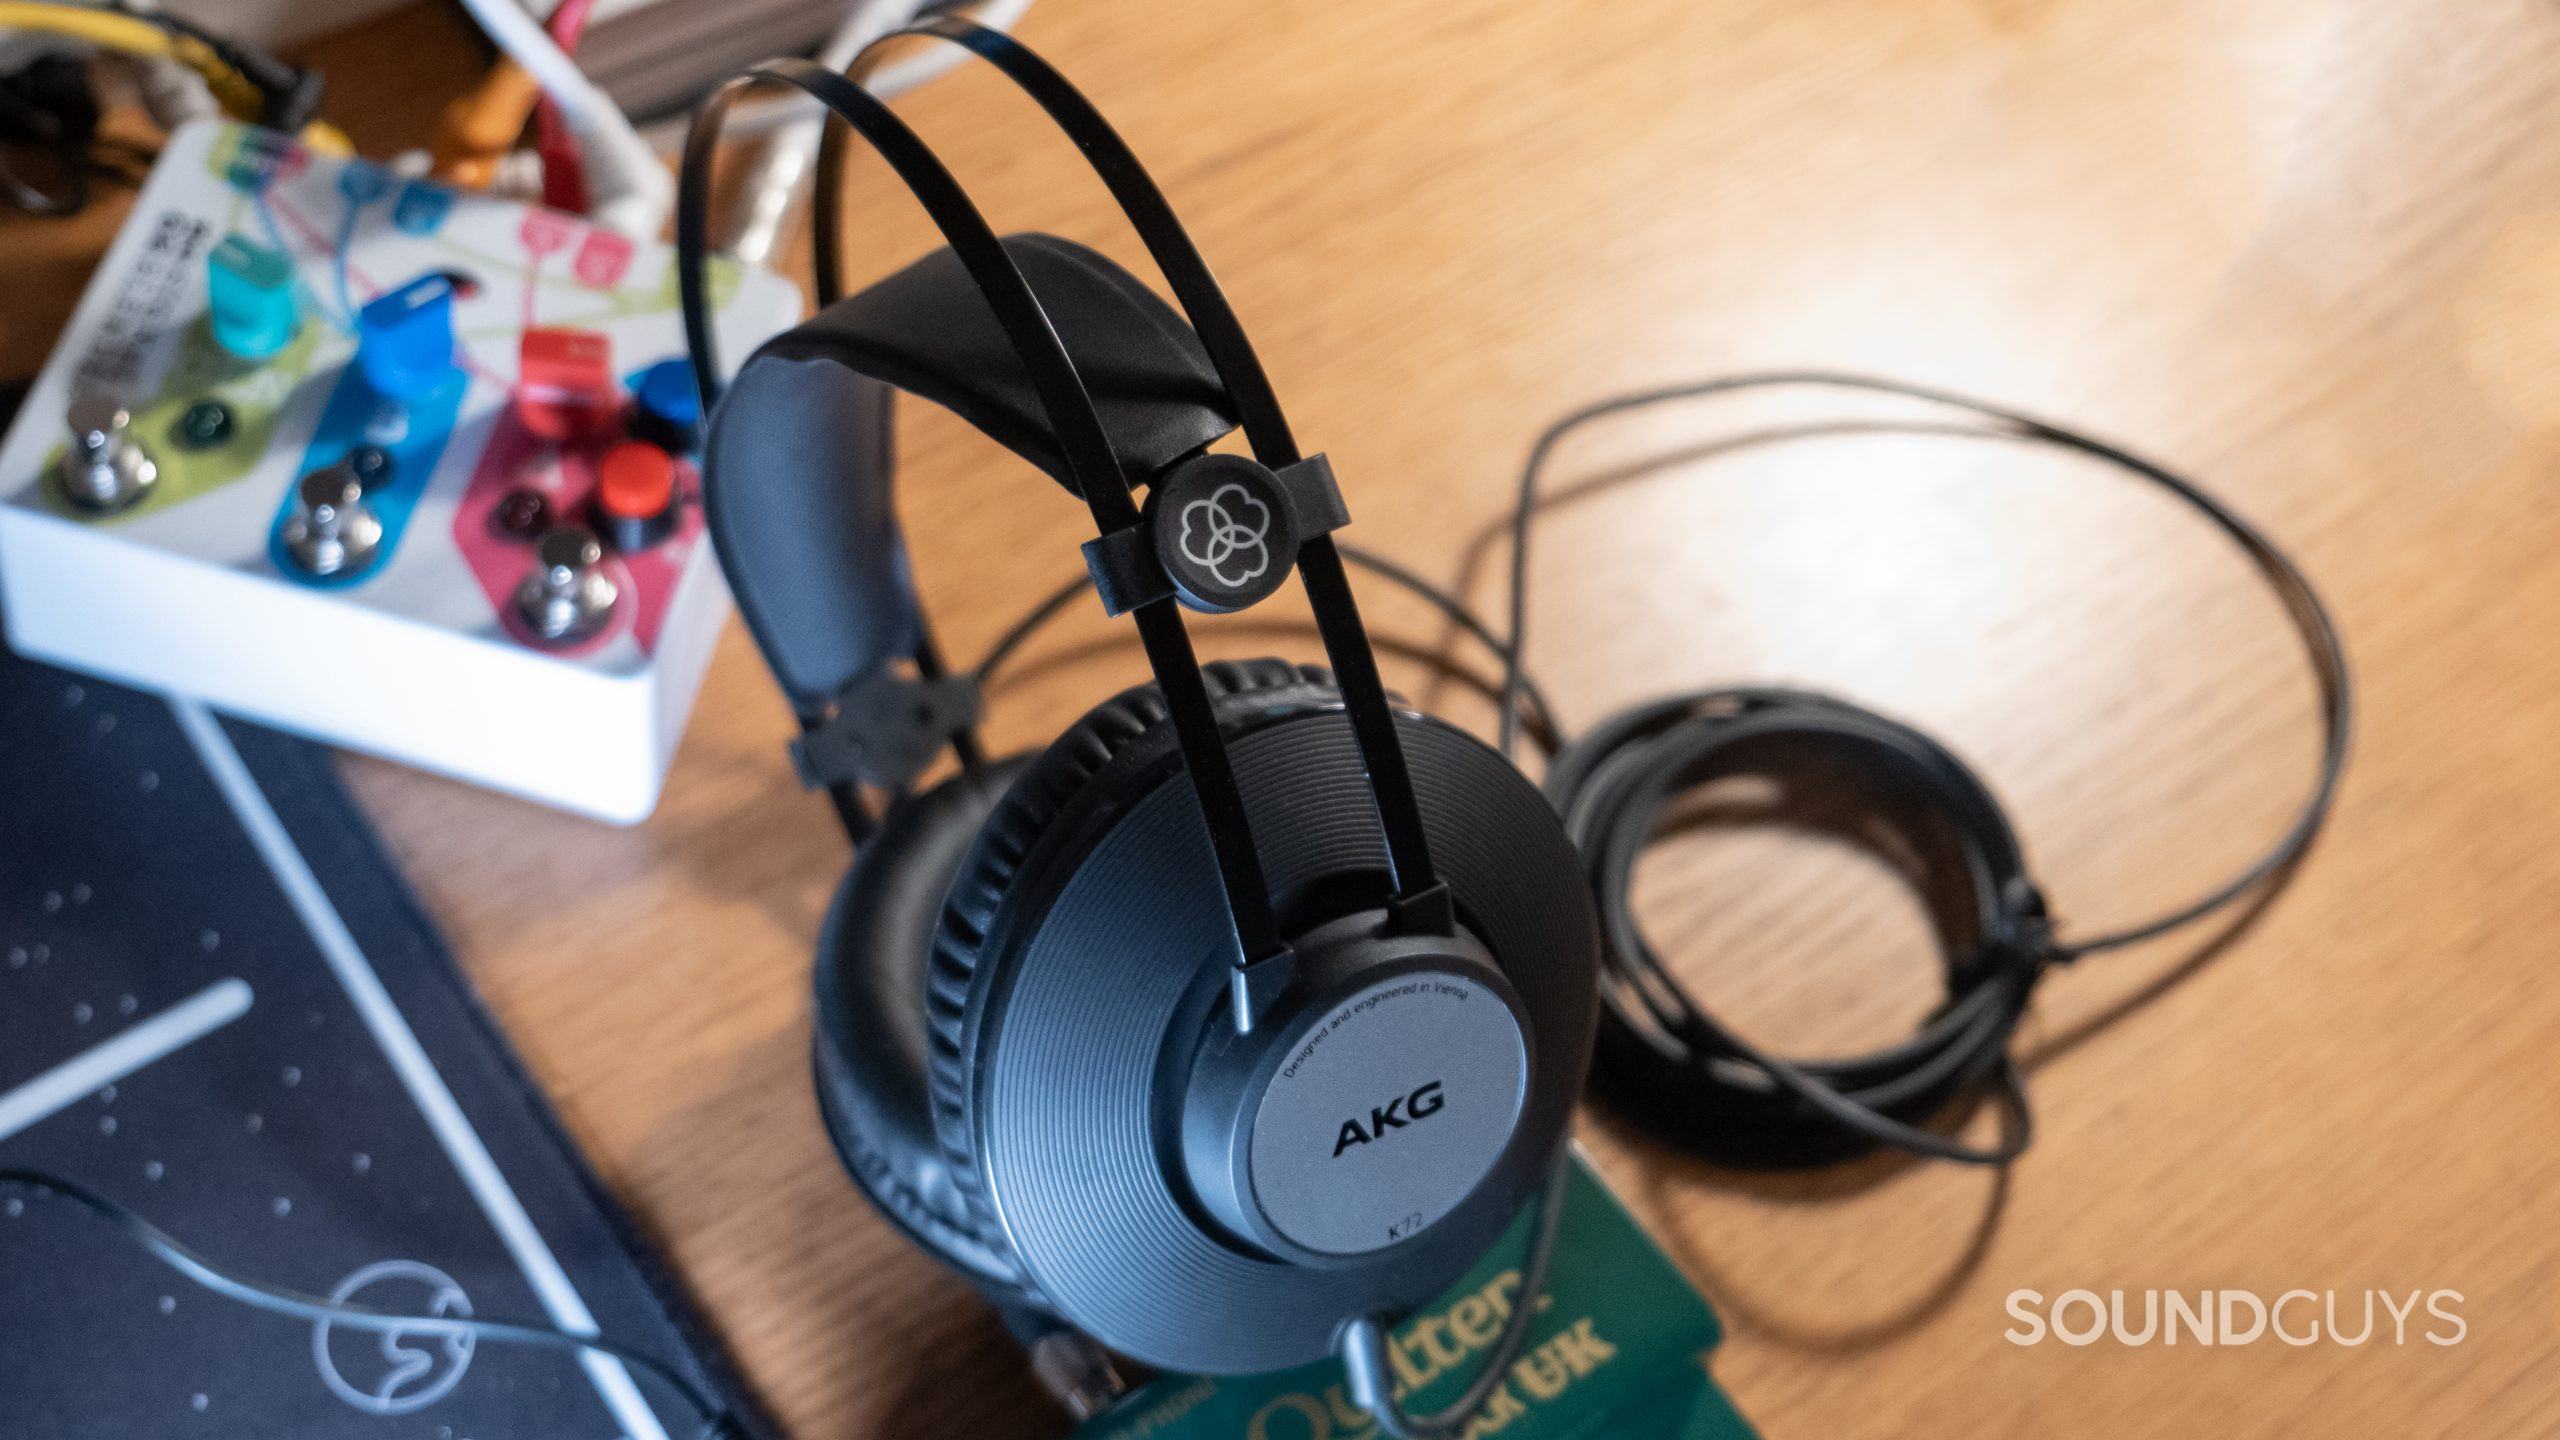 The AKG K72 centered with music gear and the long cable shown.